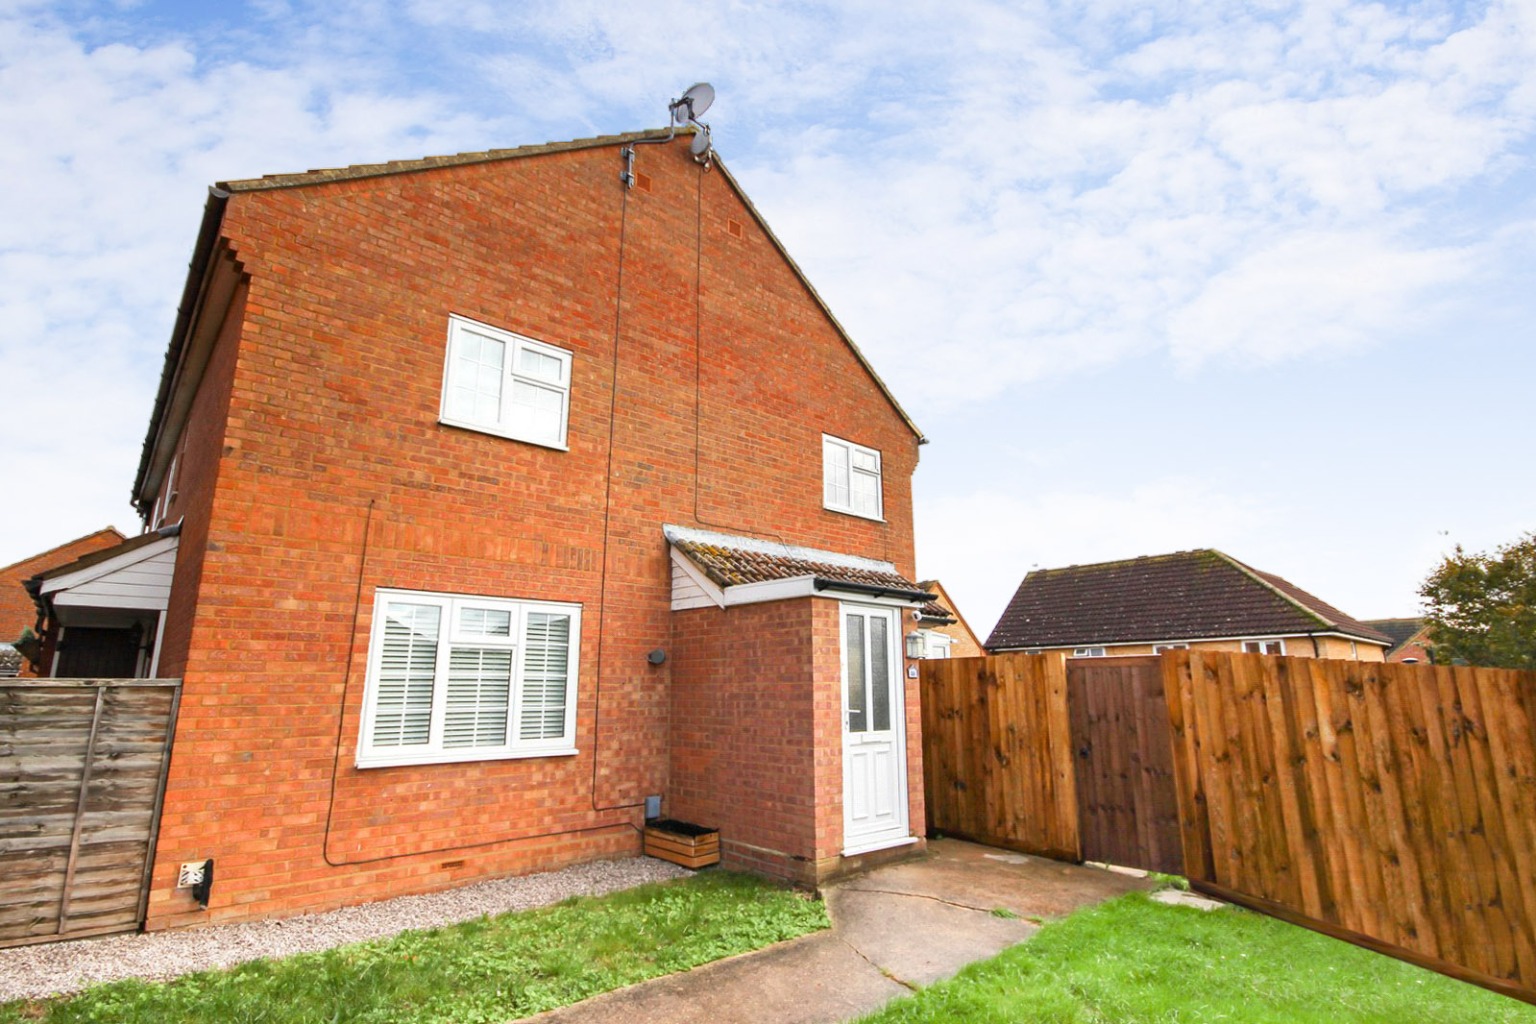 2 bed terraced house for sale in Shortstown, Bedfordshire - Property Image 1